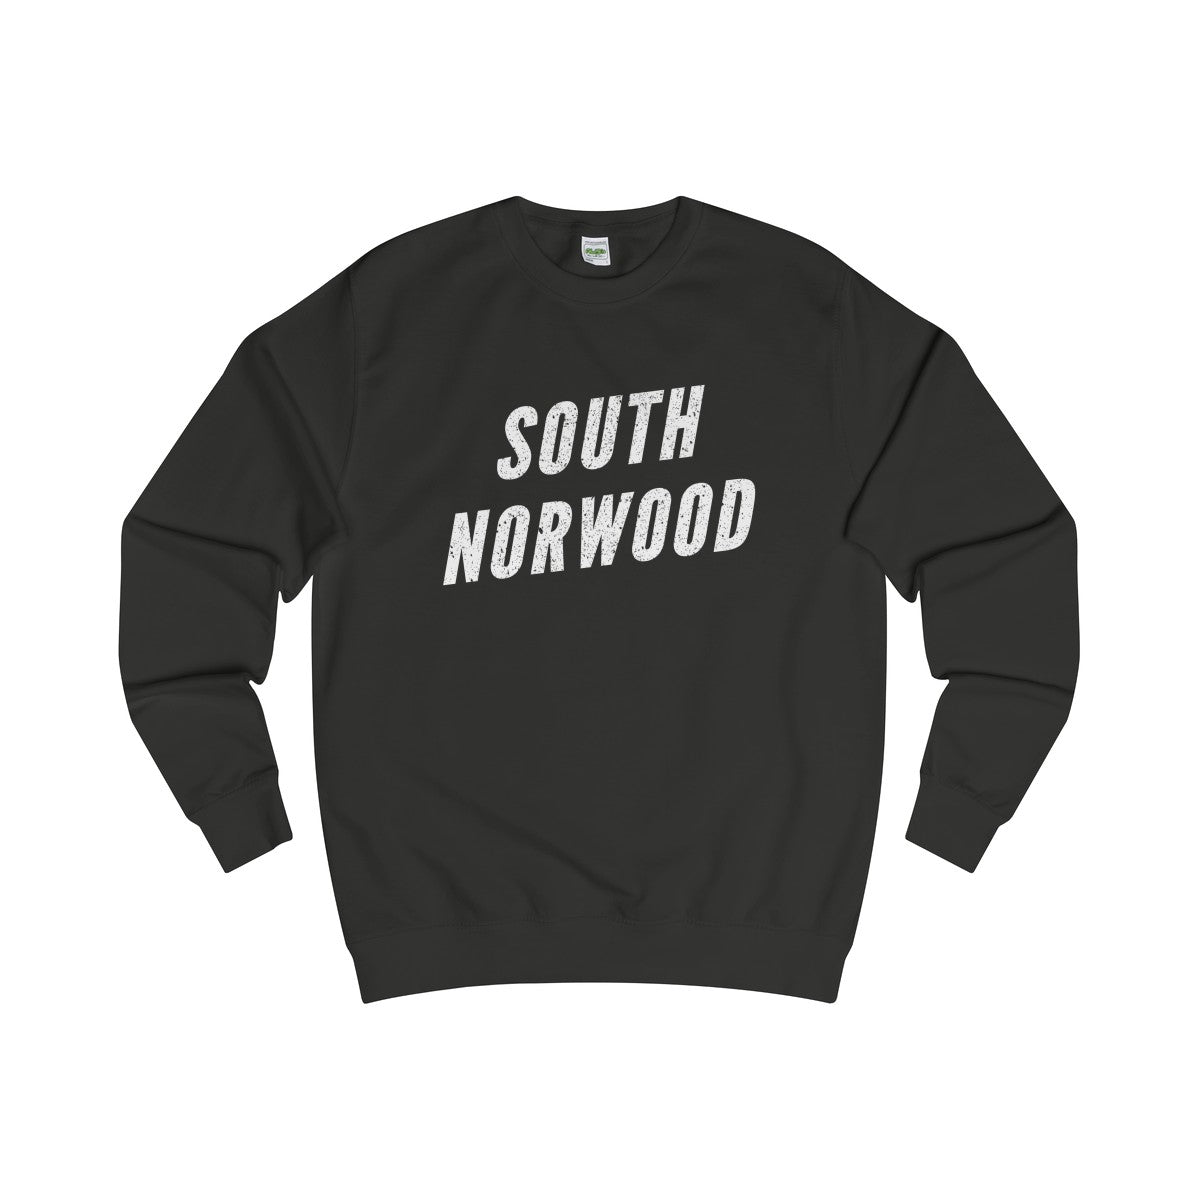 South Norwood Sweater